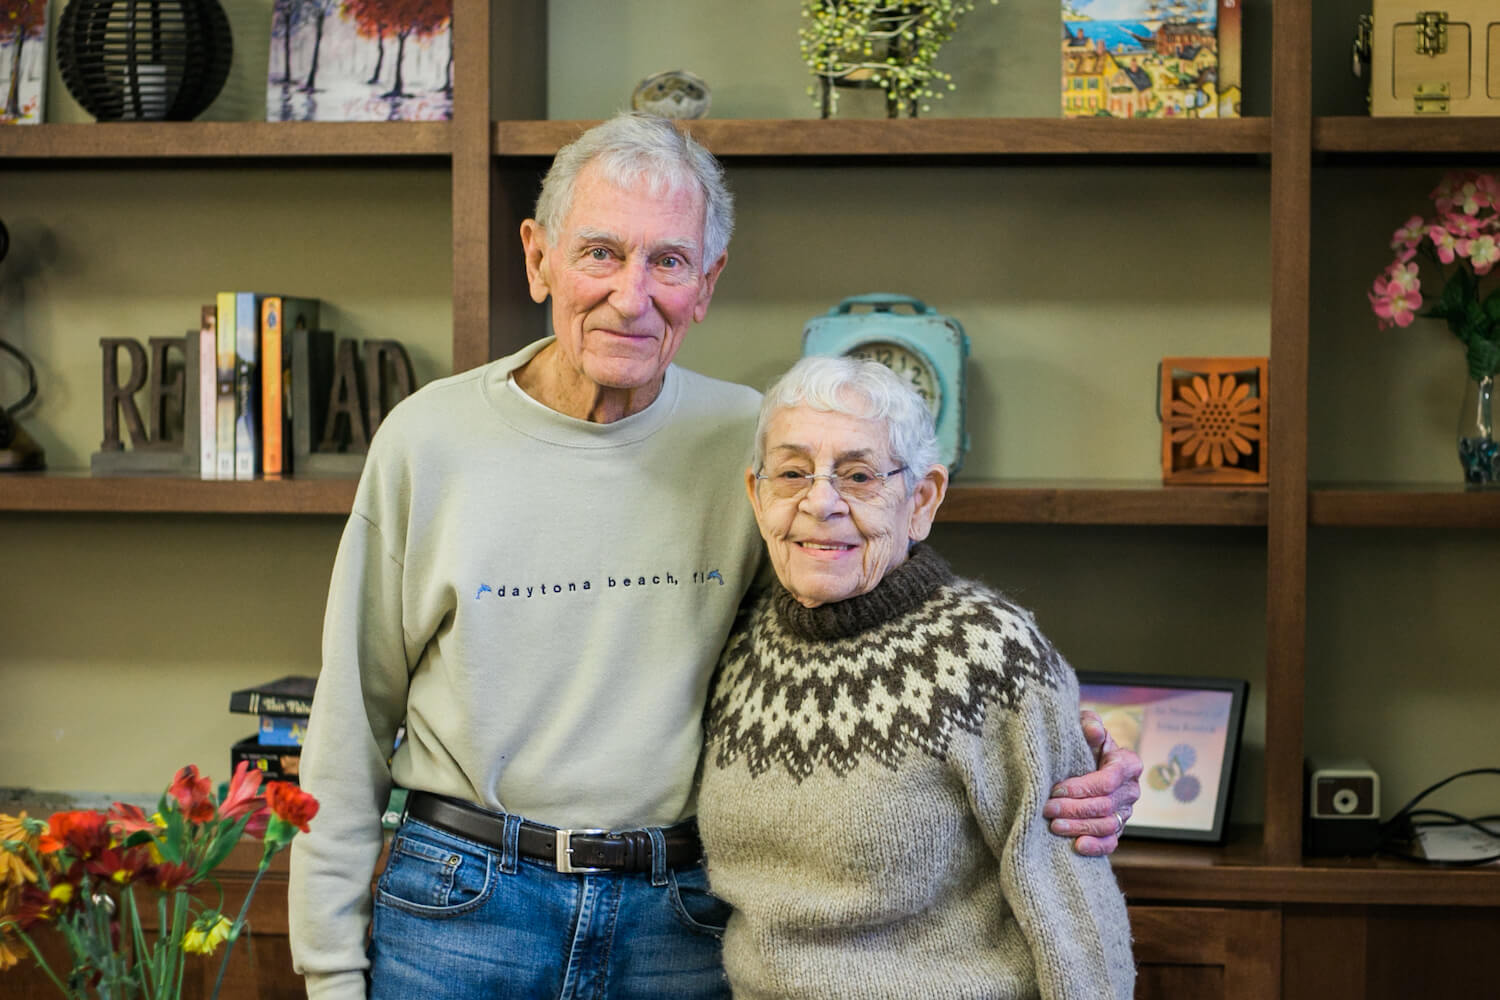 A senior man and woman standing in front of bookshelves, smiling at the camera